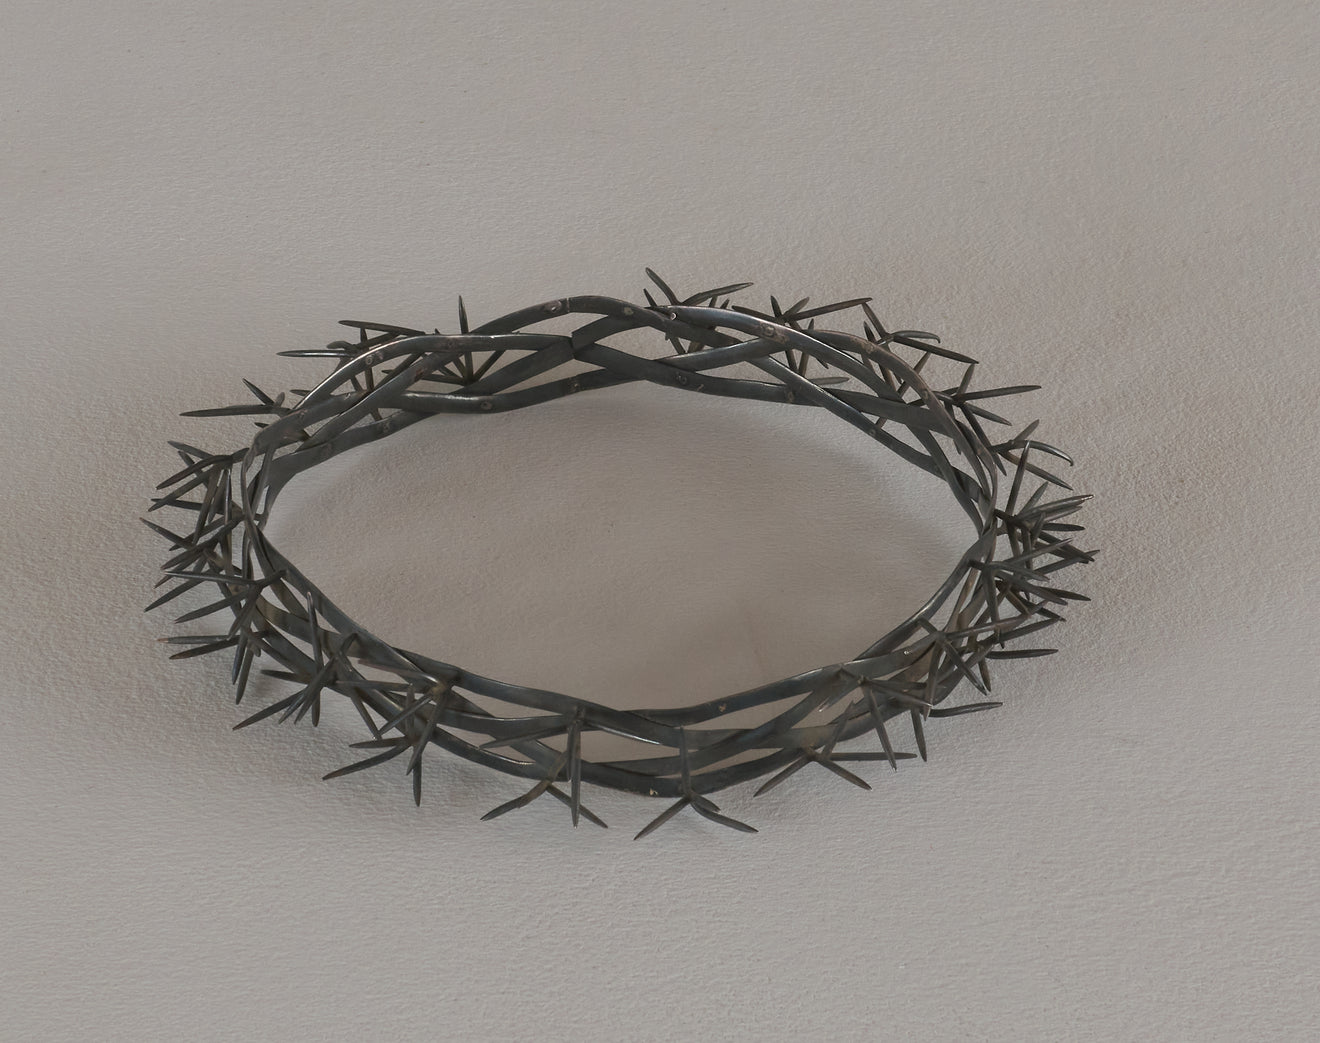 SILVER CROWN OF THORNS